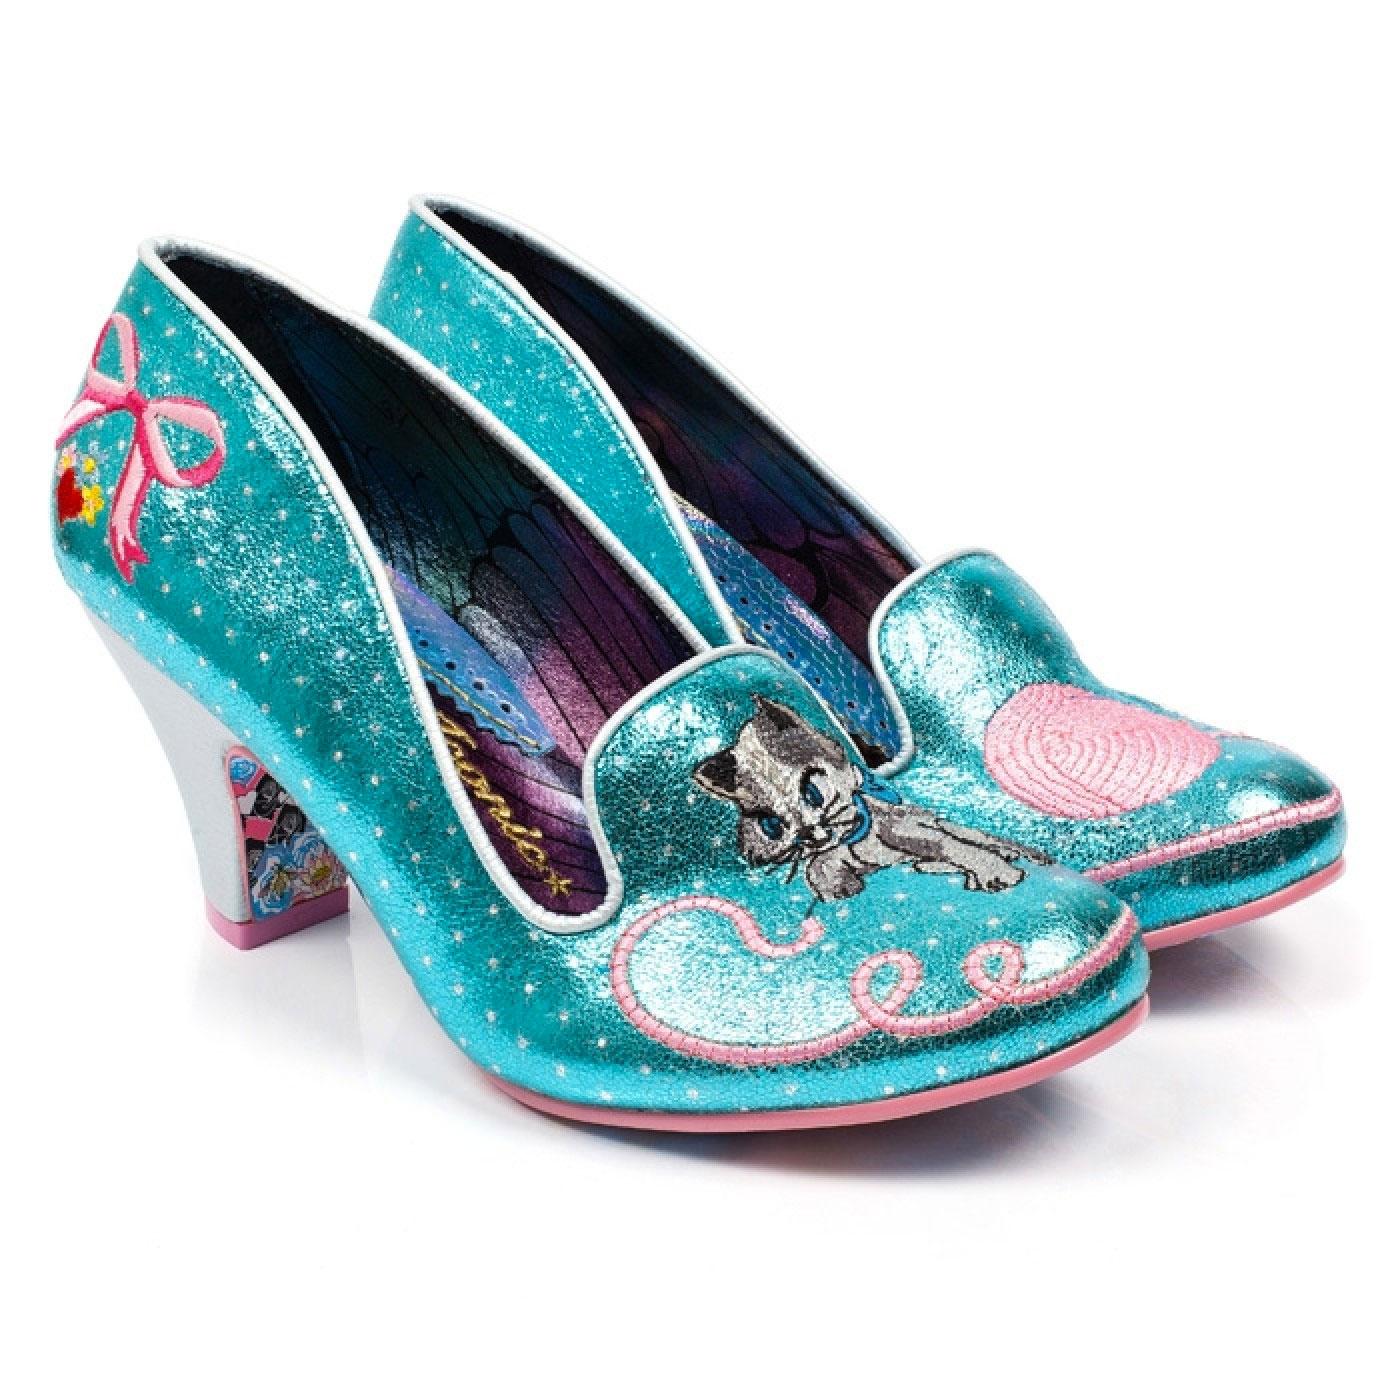 Fuzzy Peg IRREGULAR CHOICE Kitty Shoes in Blue